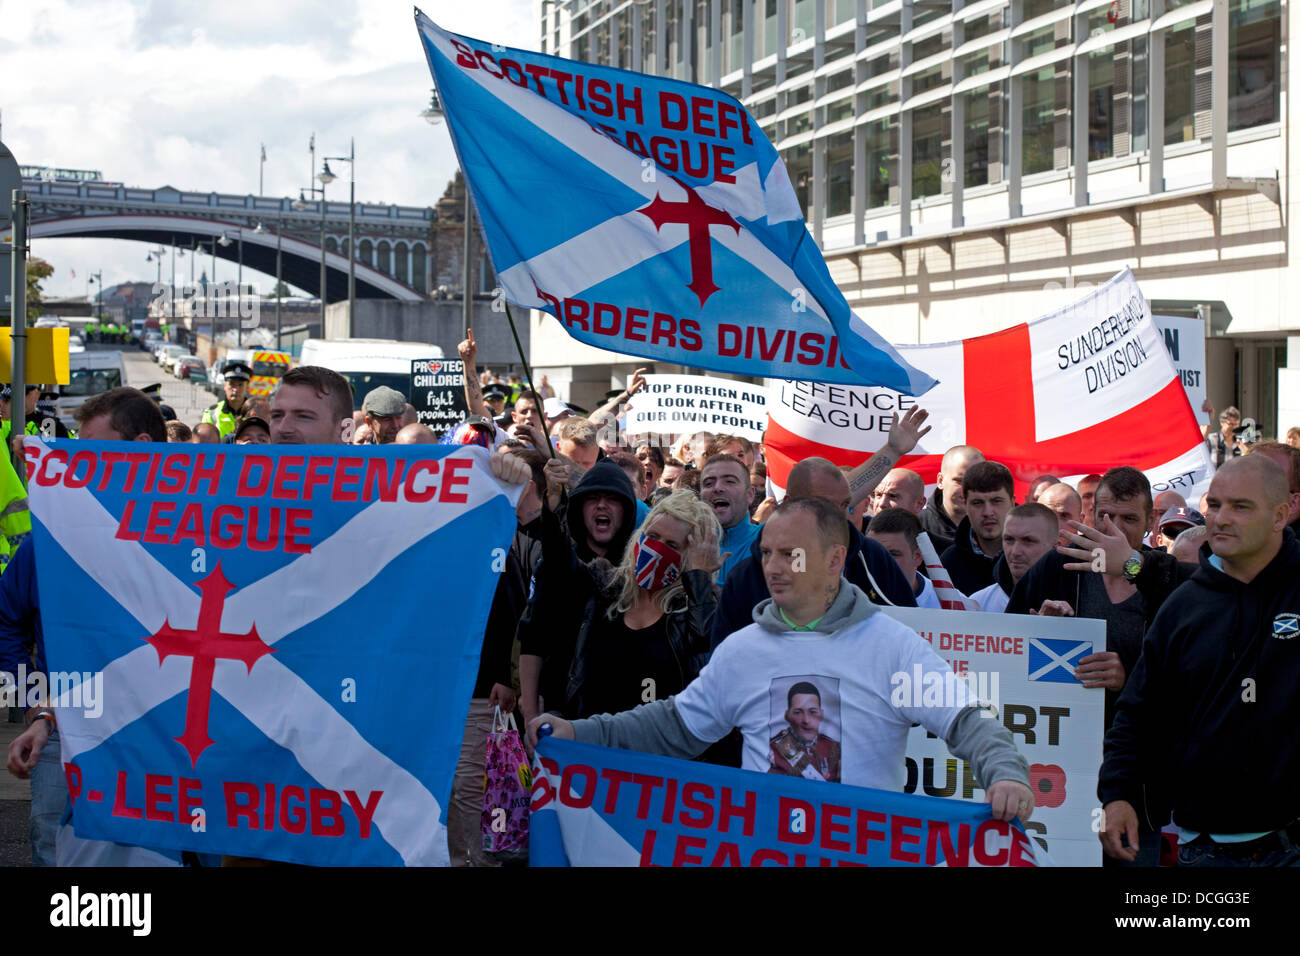 Edinburgh, Scotland 17th August 2013, The Scottish Defence League (SDL) and their supporters marched down  the city's Royal Mile to the  Parliament. Stock Photo